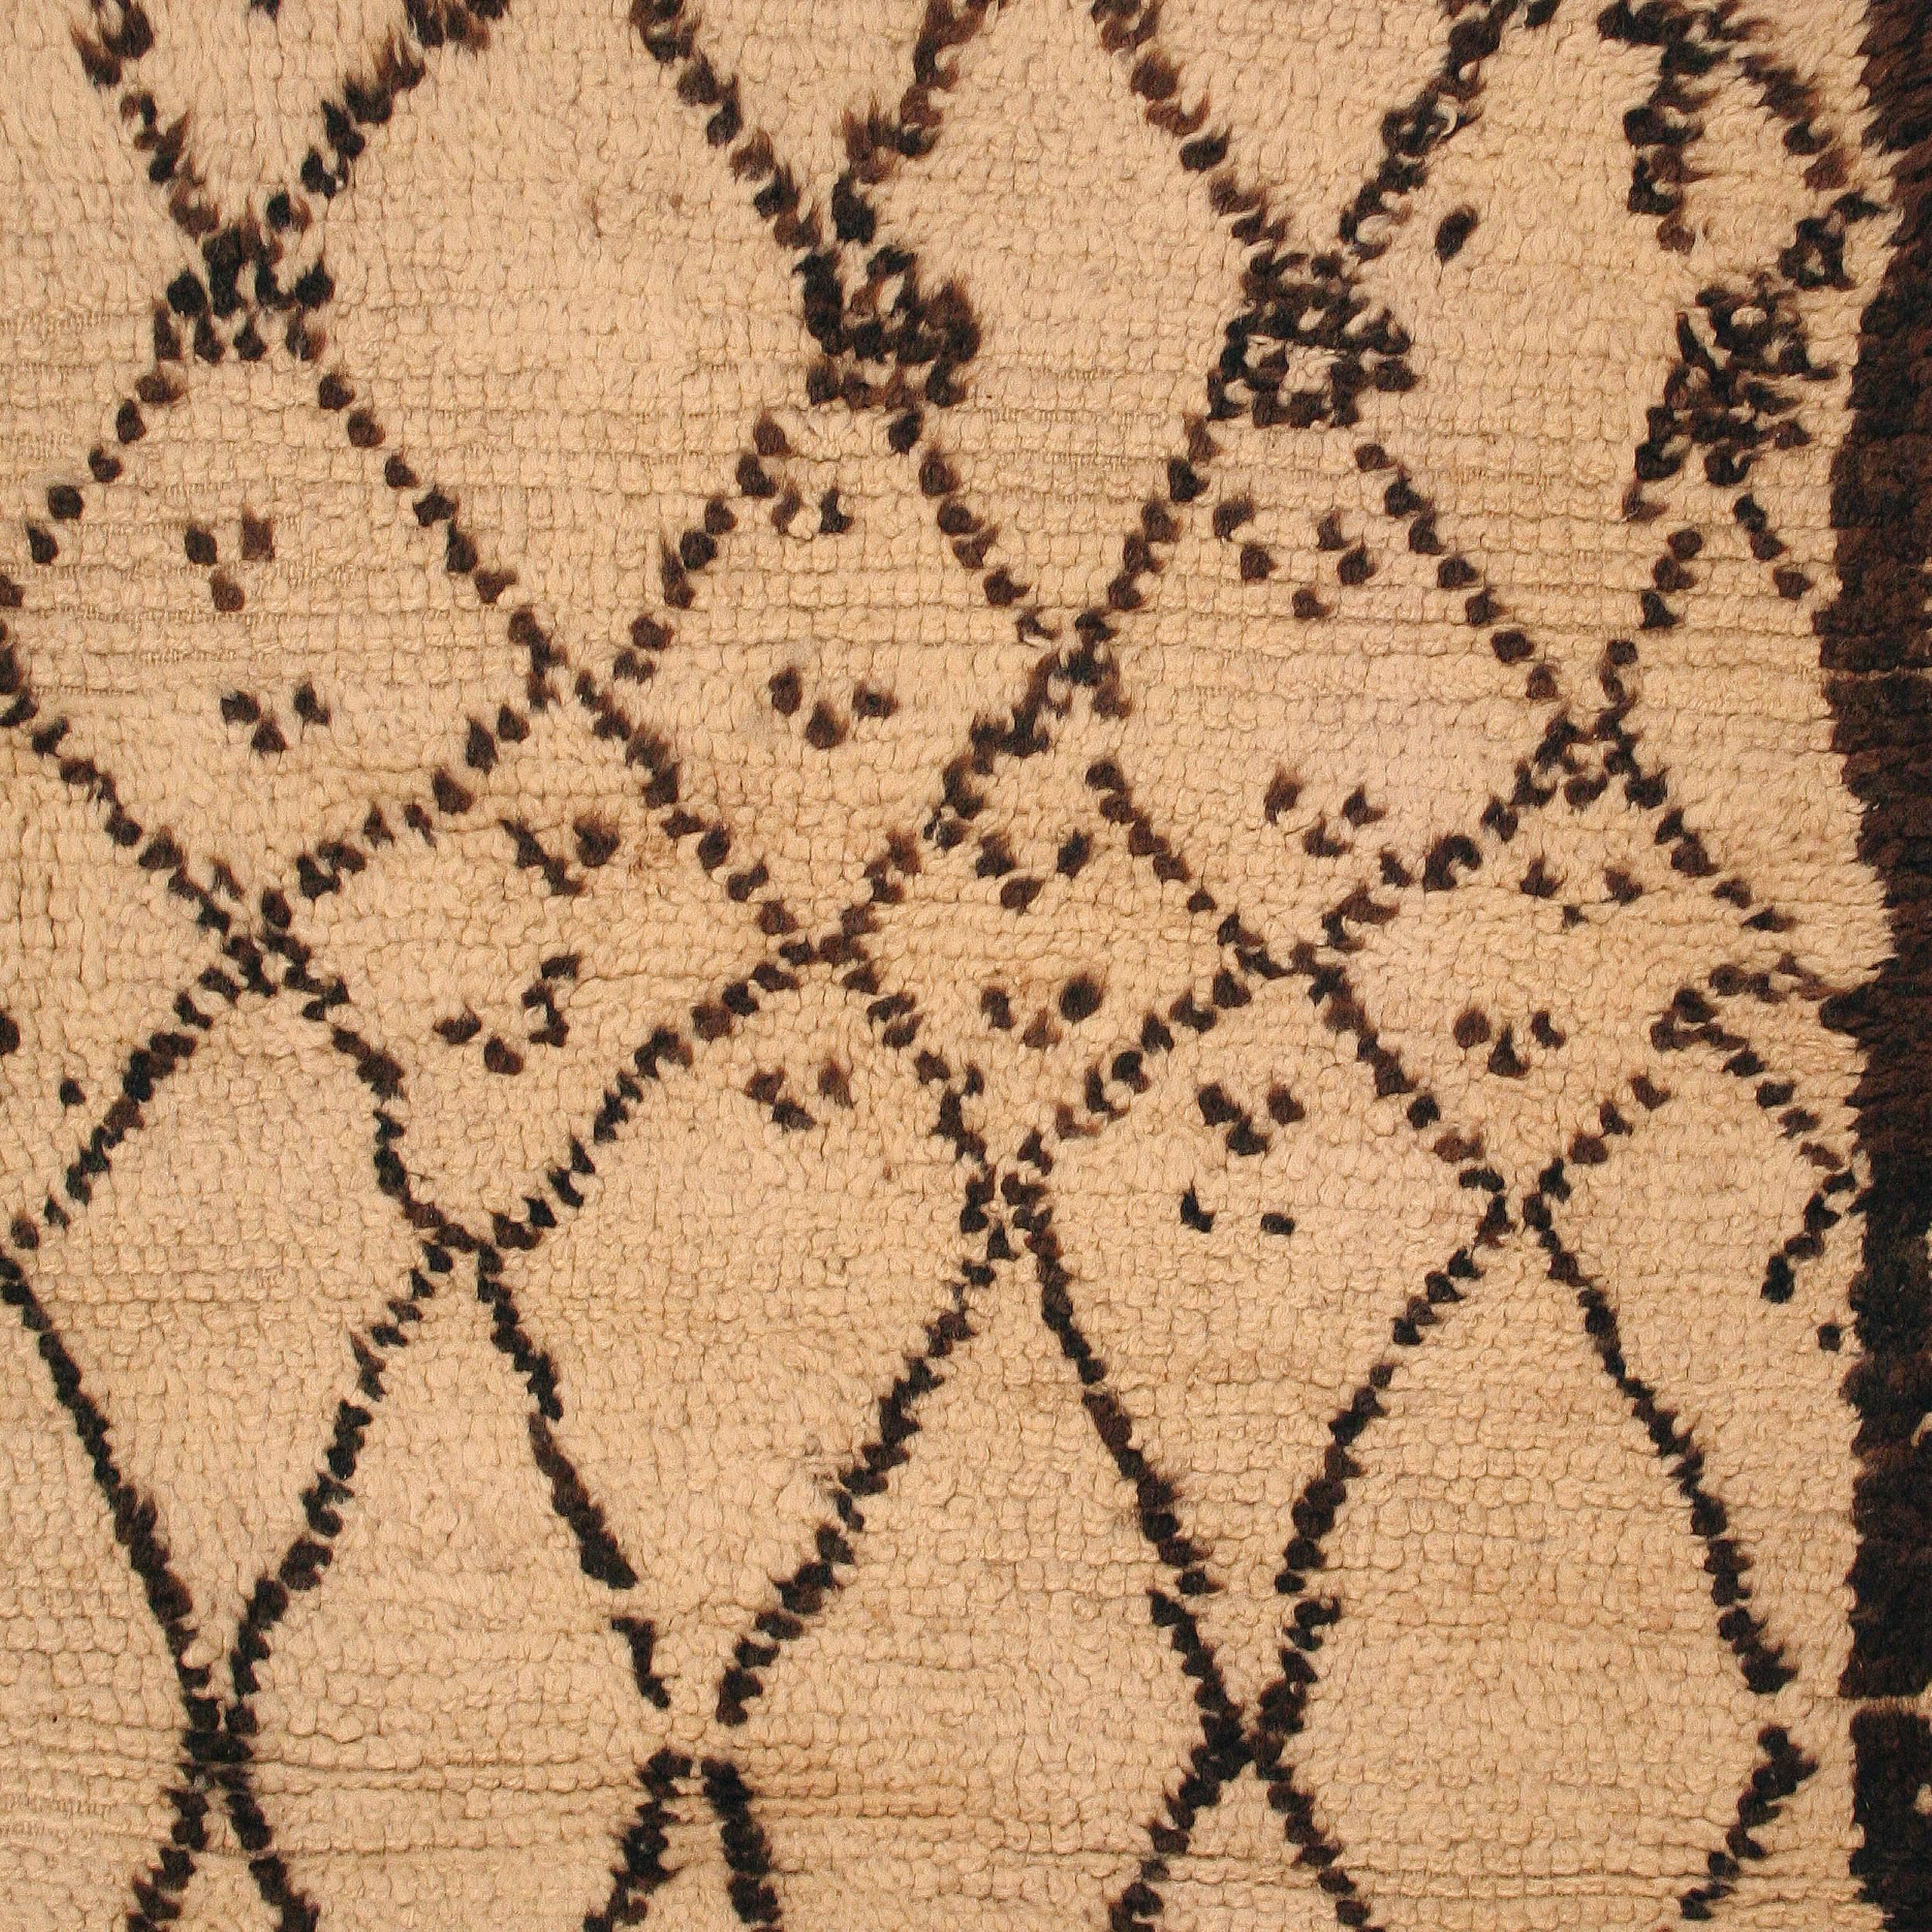 The carpets of the Beni Ouarain tribal confederacy differ from other Berber weavings in that they are woven exclusively with an ivory background and decorated with abstract geometric motifs of undyed natural wool. The high quality of the materials